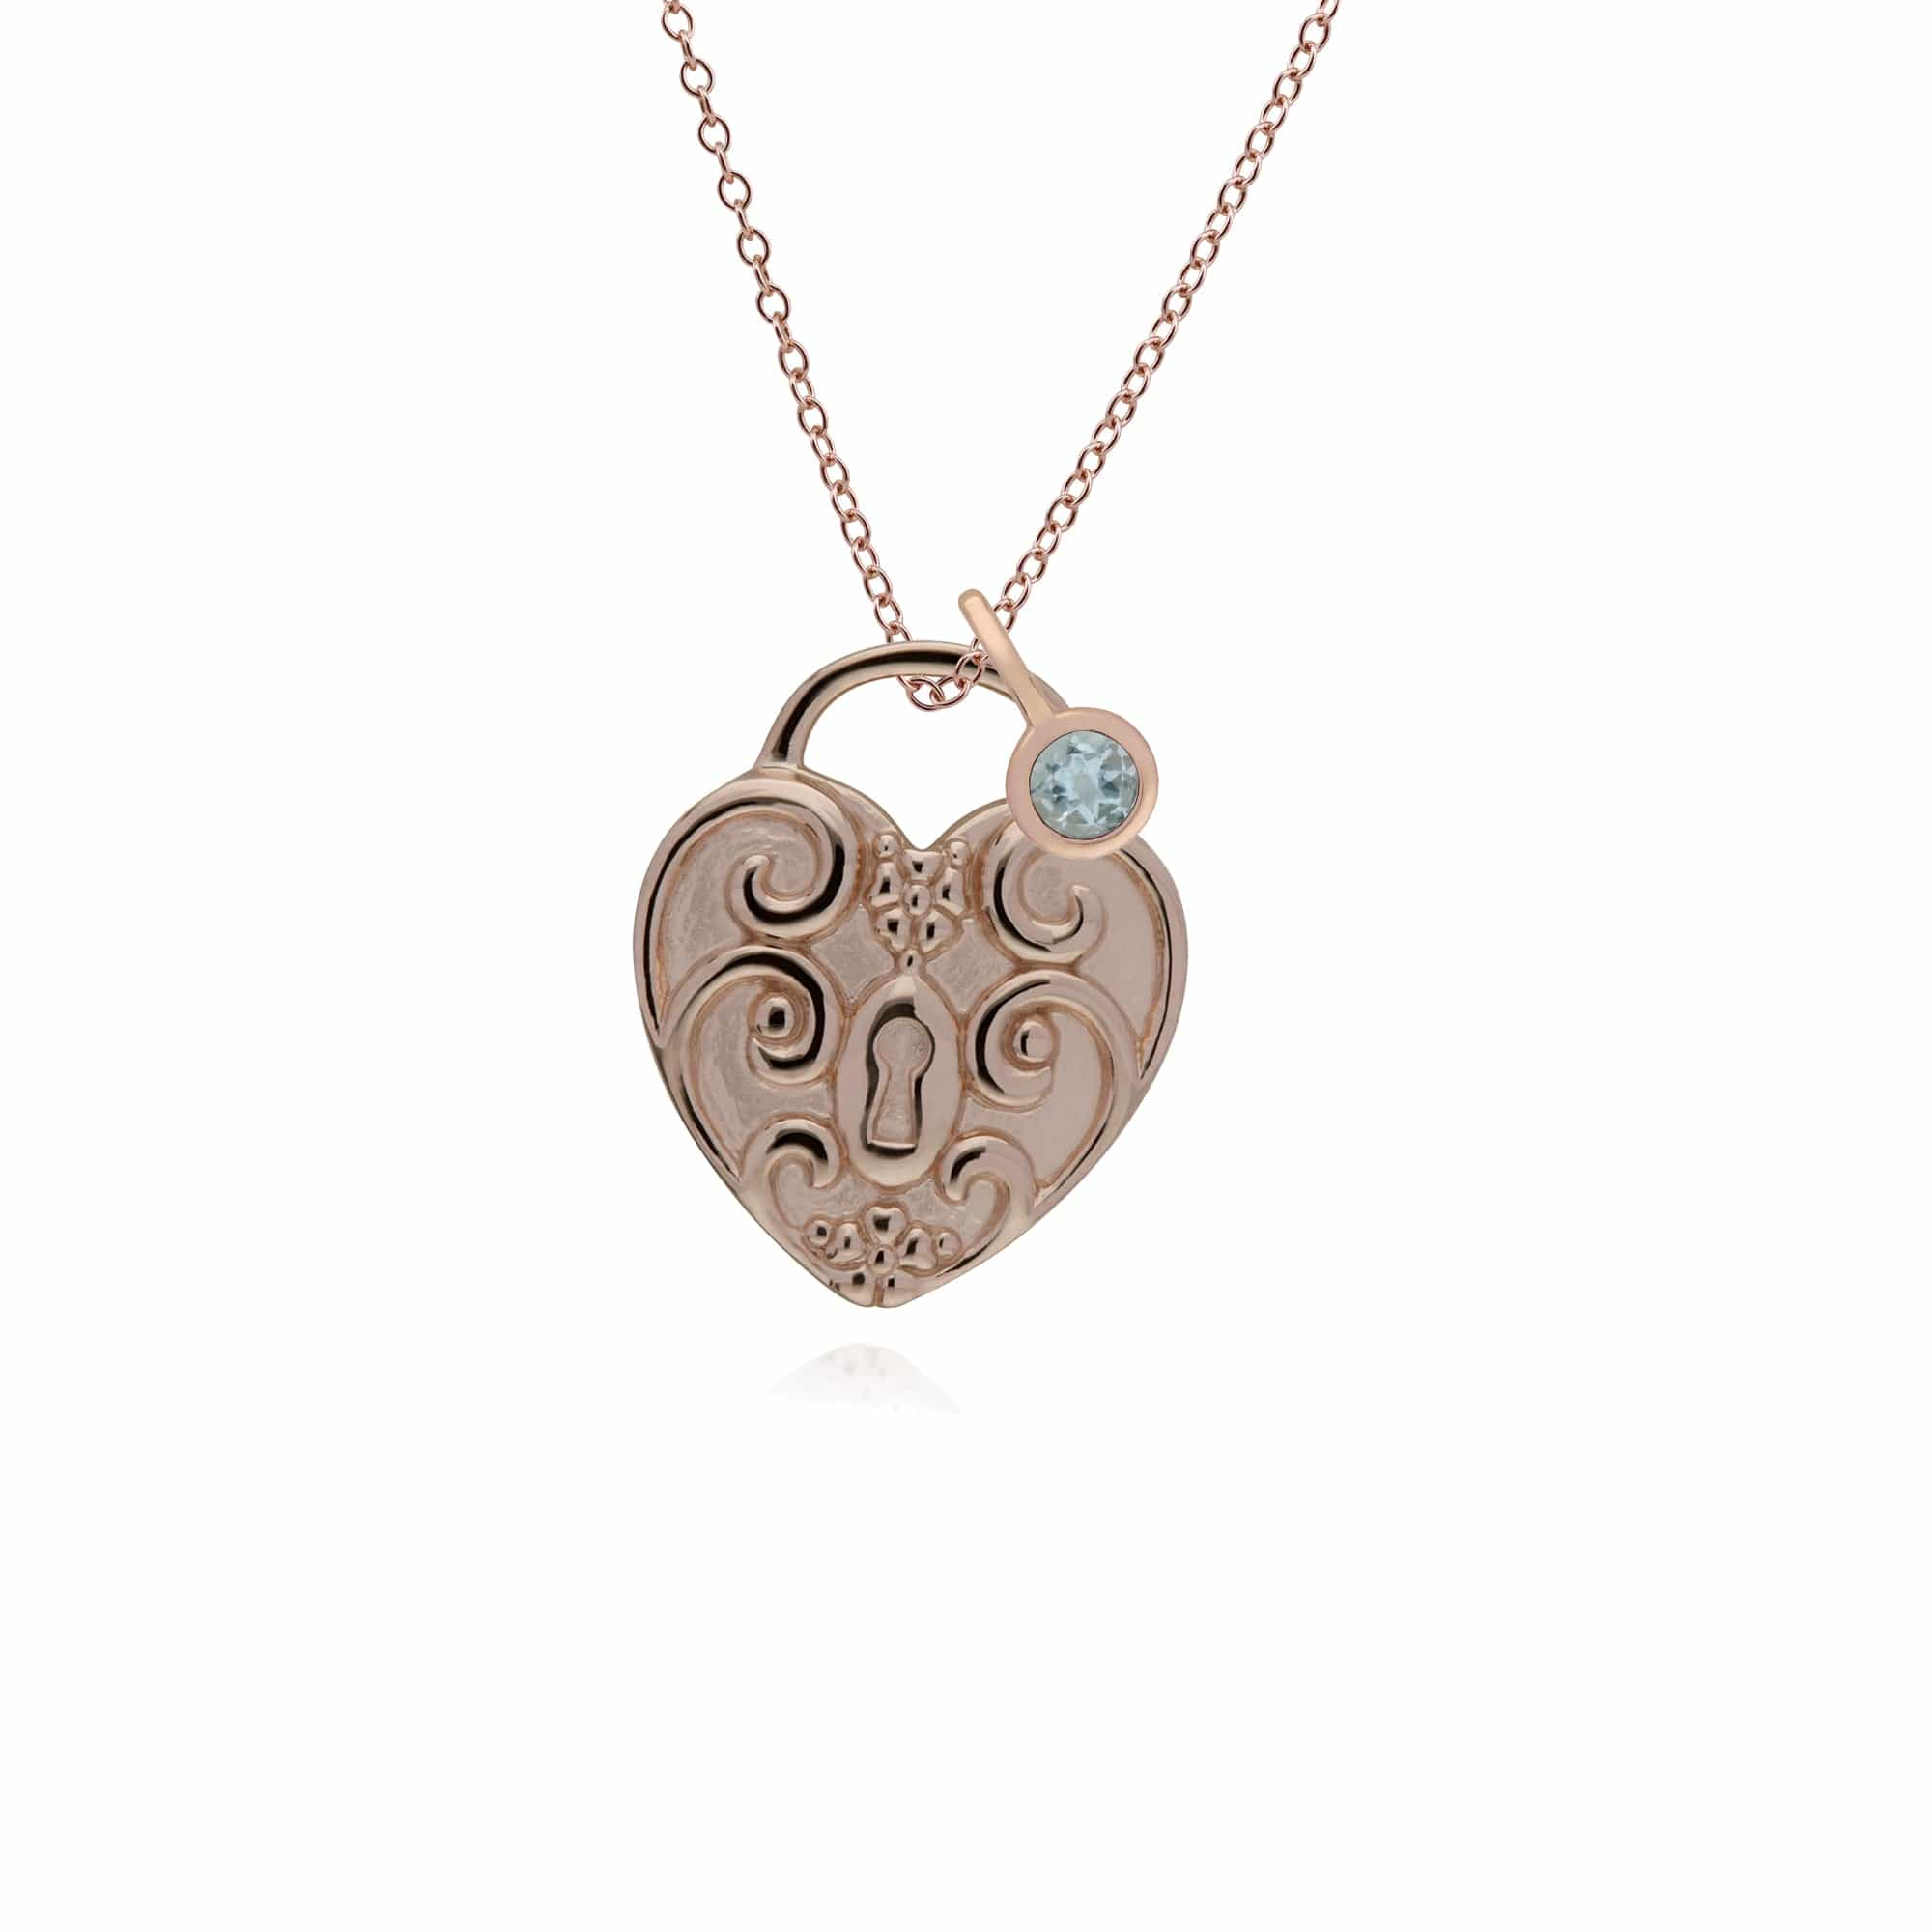 270P027307925-270P026501925 Classic Swirl Heart Lock Pendant & Aquamarine Charm in Rose Gold Plated 925 Sterling Silver 1